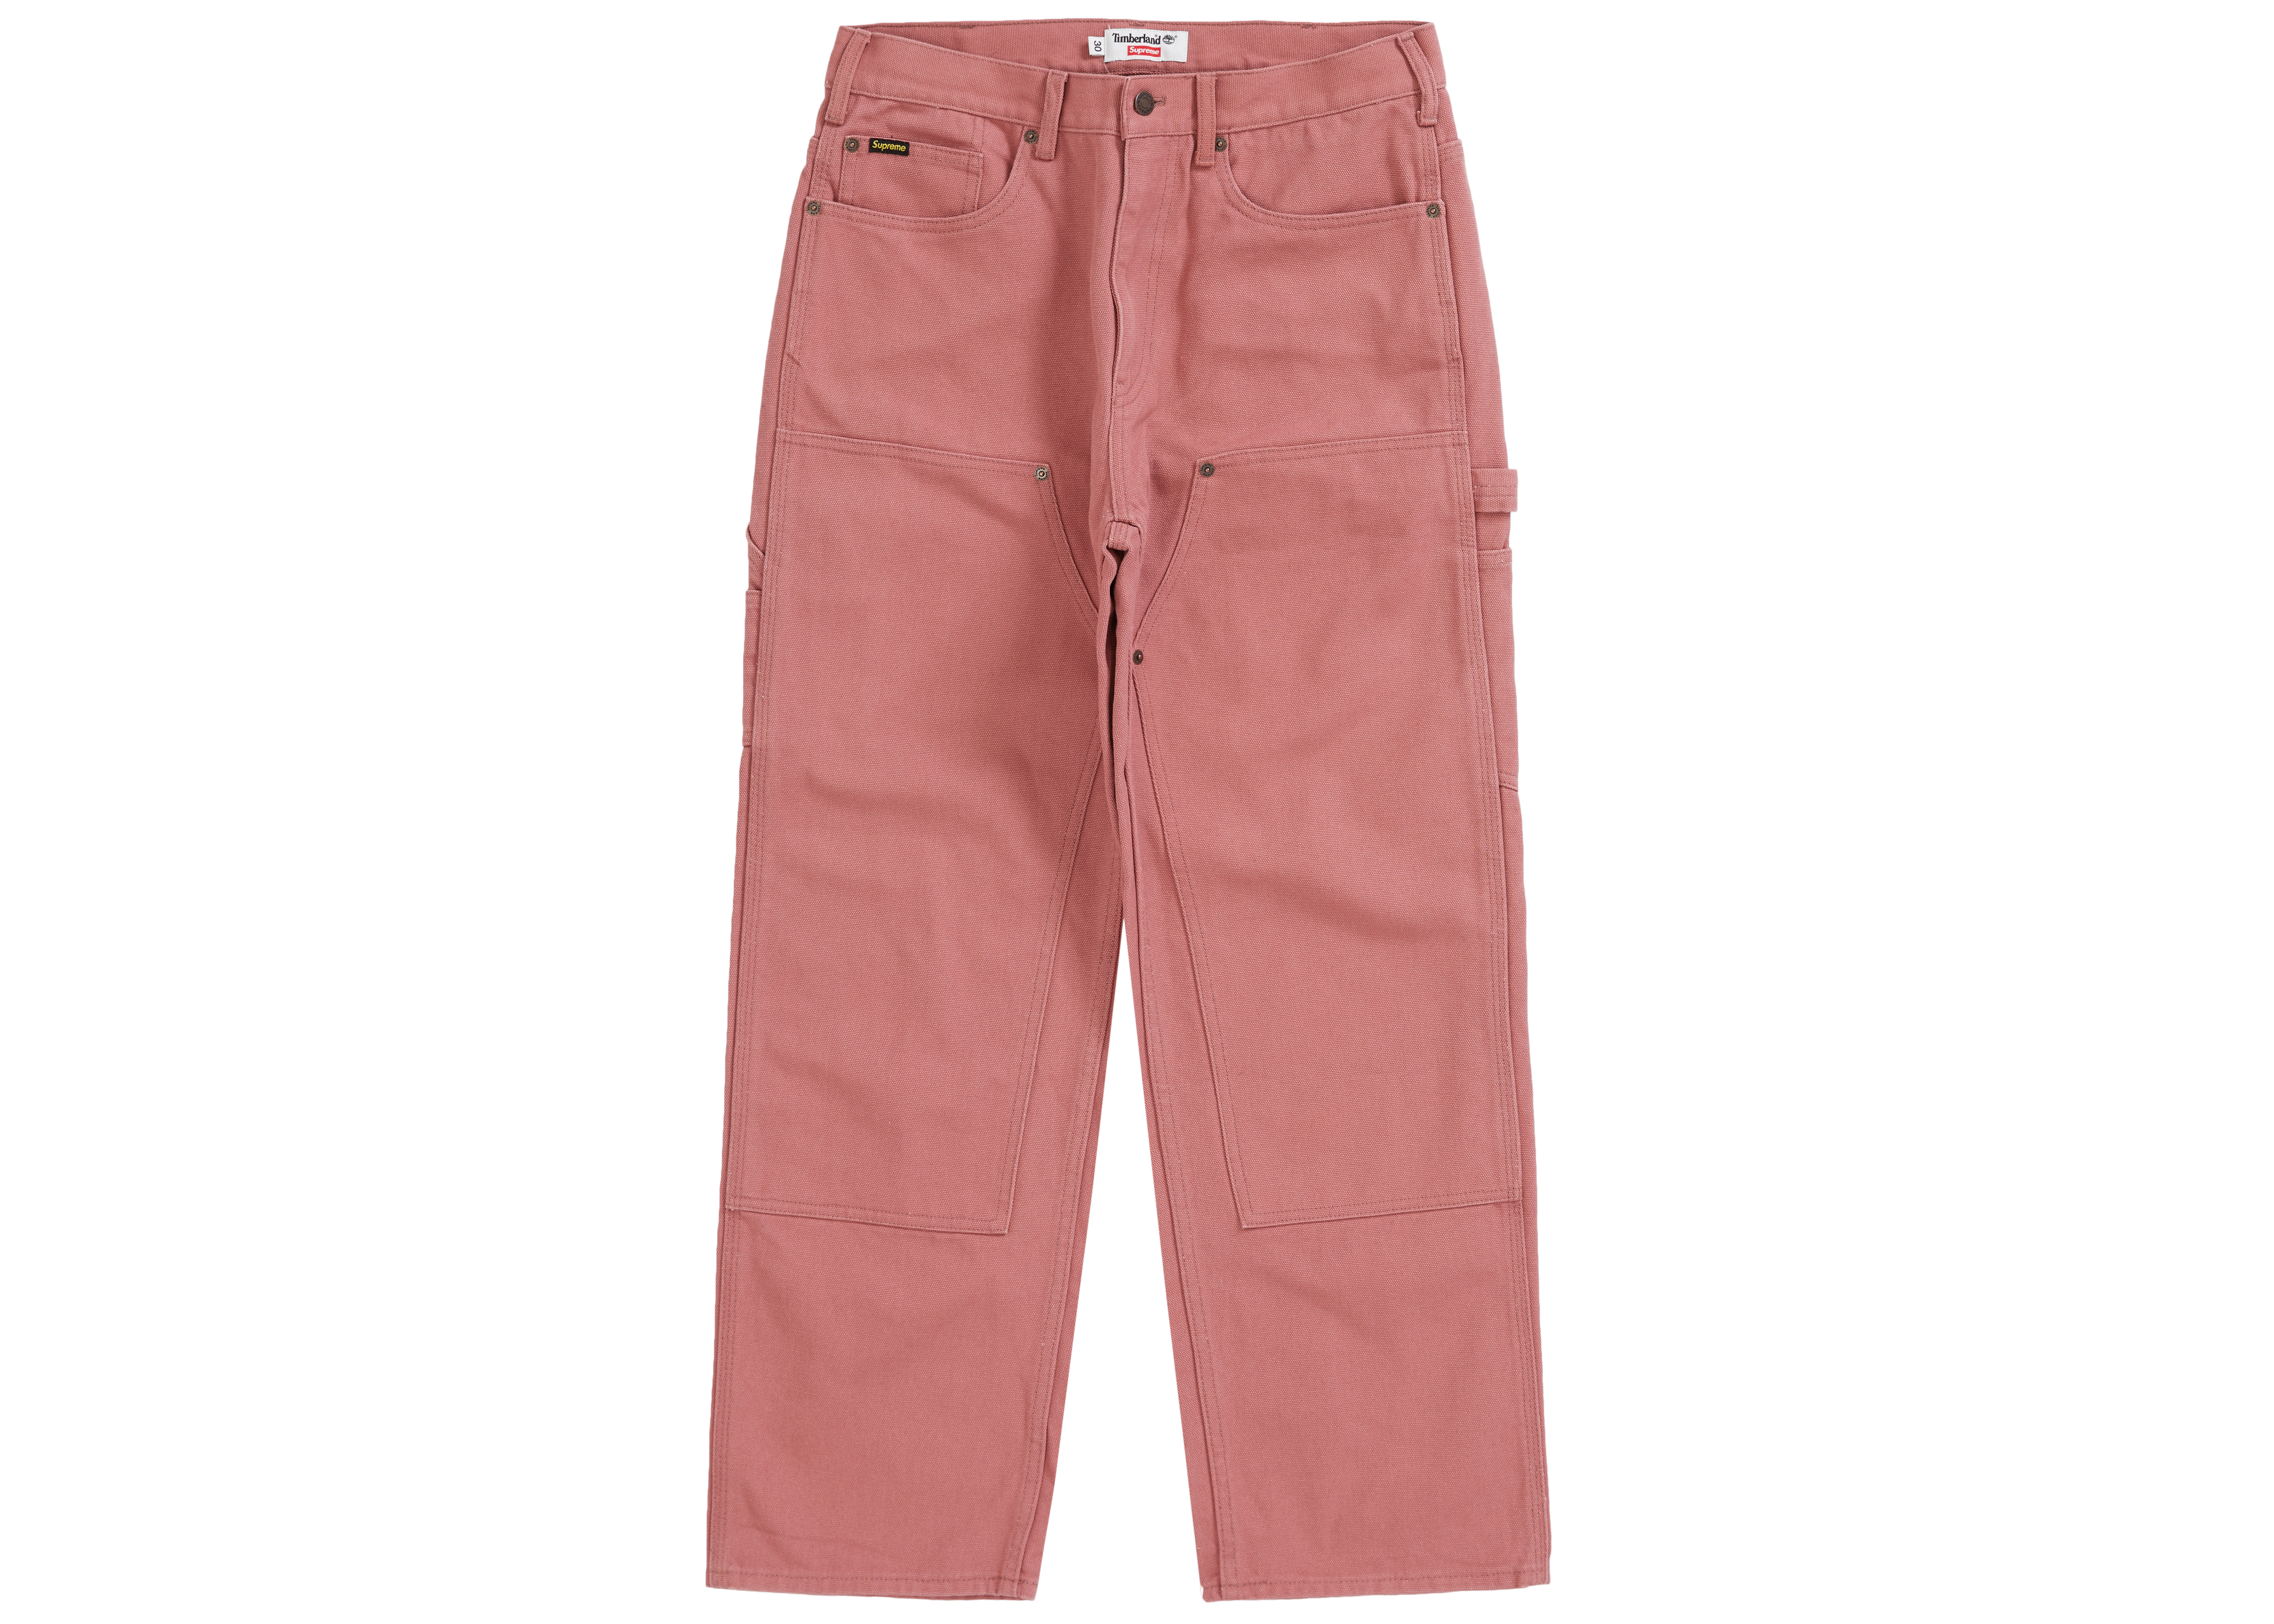 Supreme Timberland Double Knee Painter Pant Dusty Red Men's - SS21